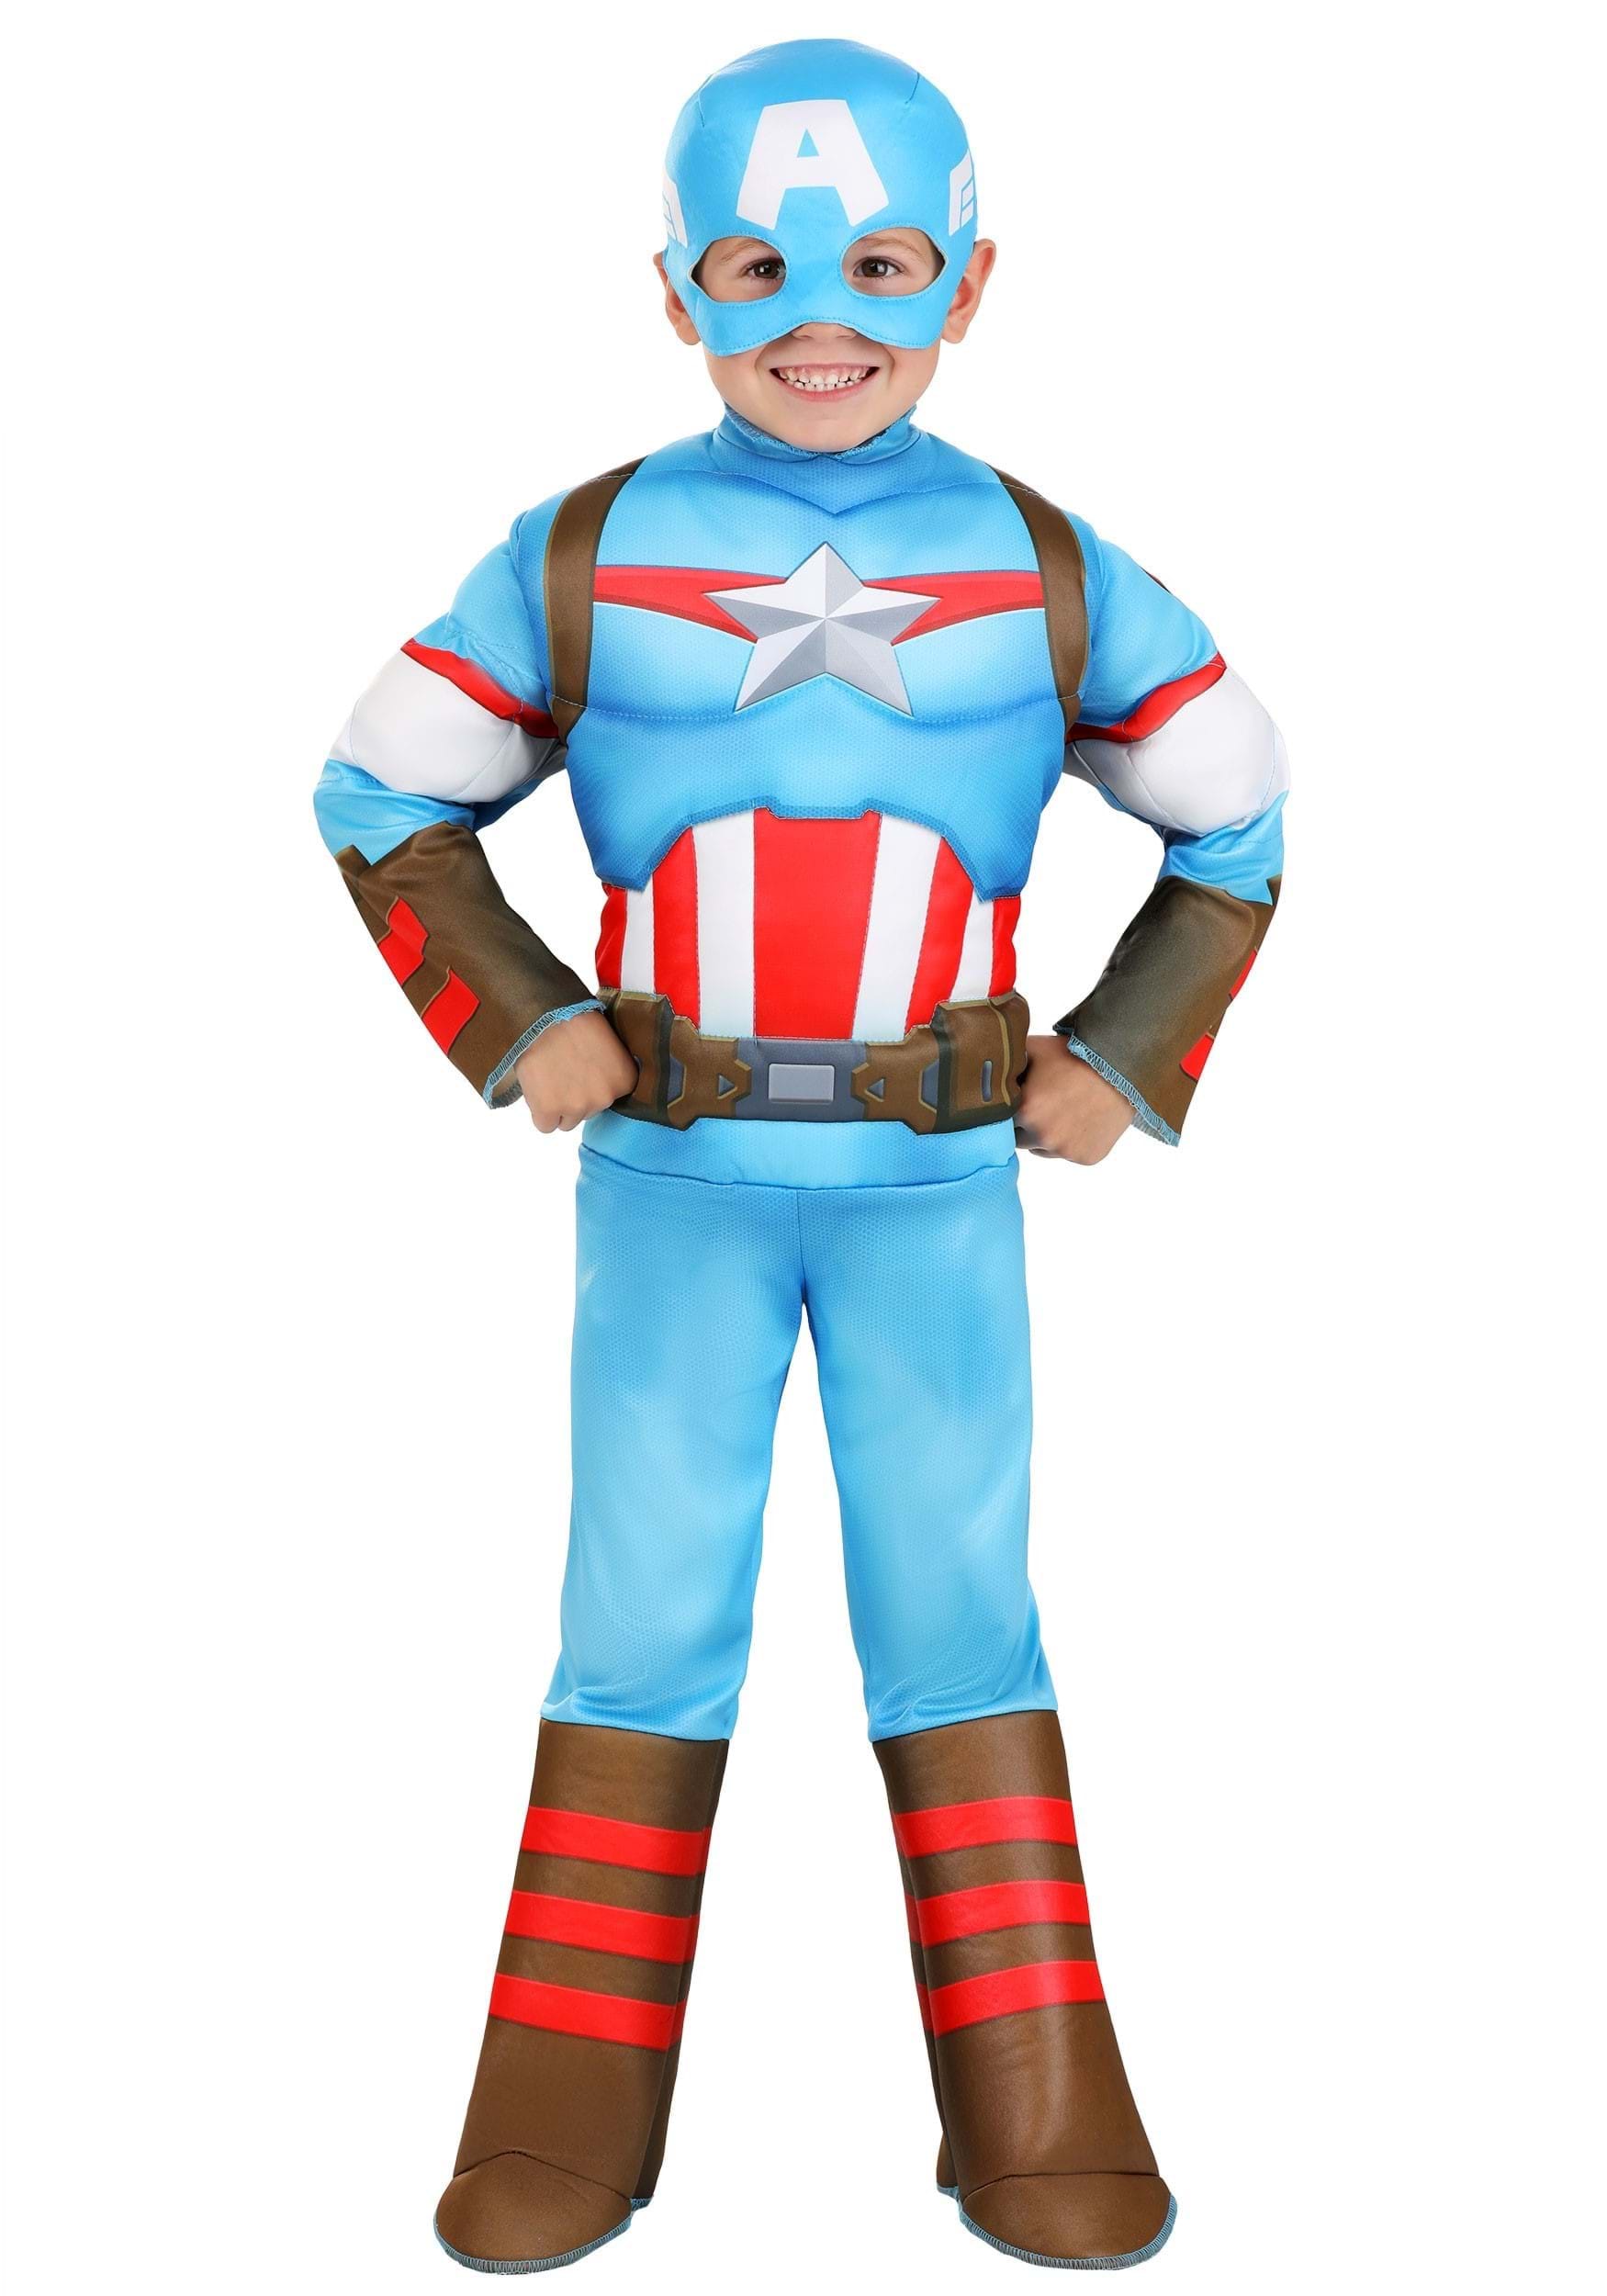 Captain America Mask And Cape For Kids - PKAWAY